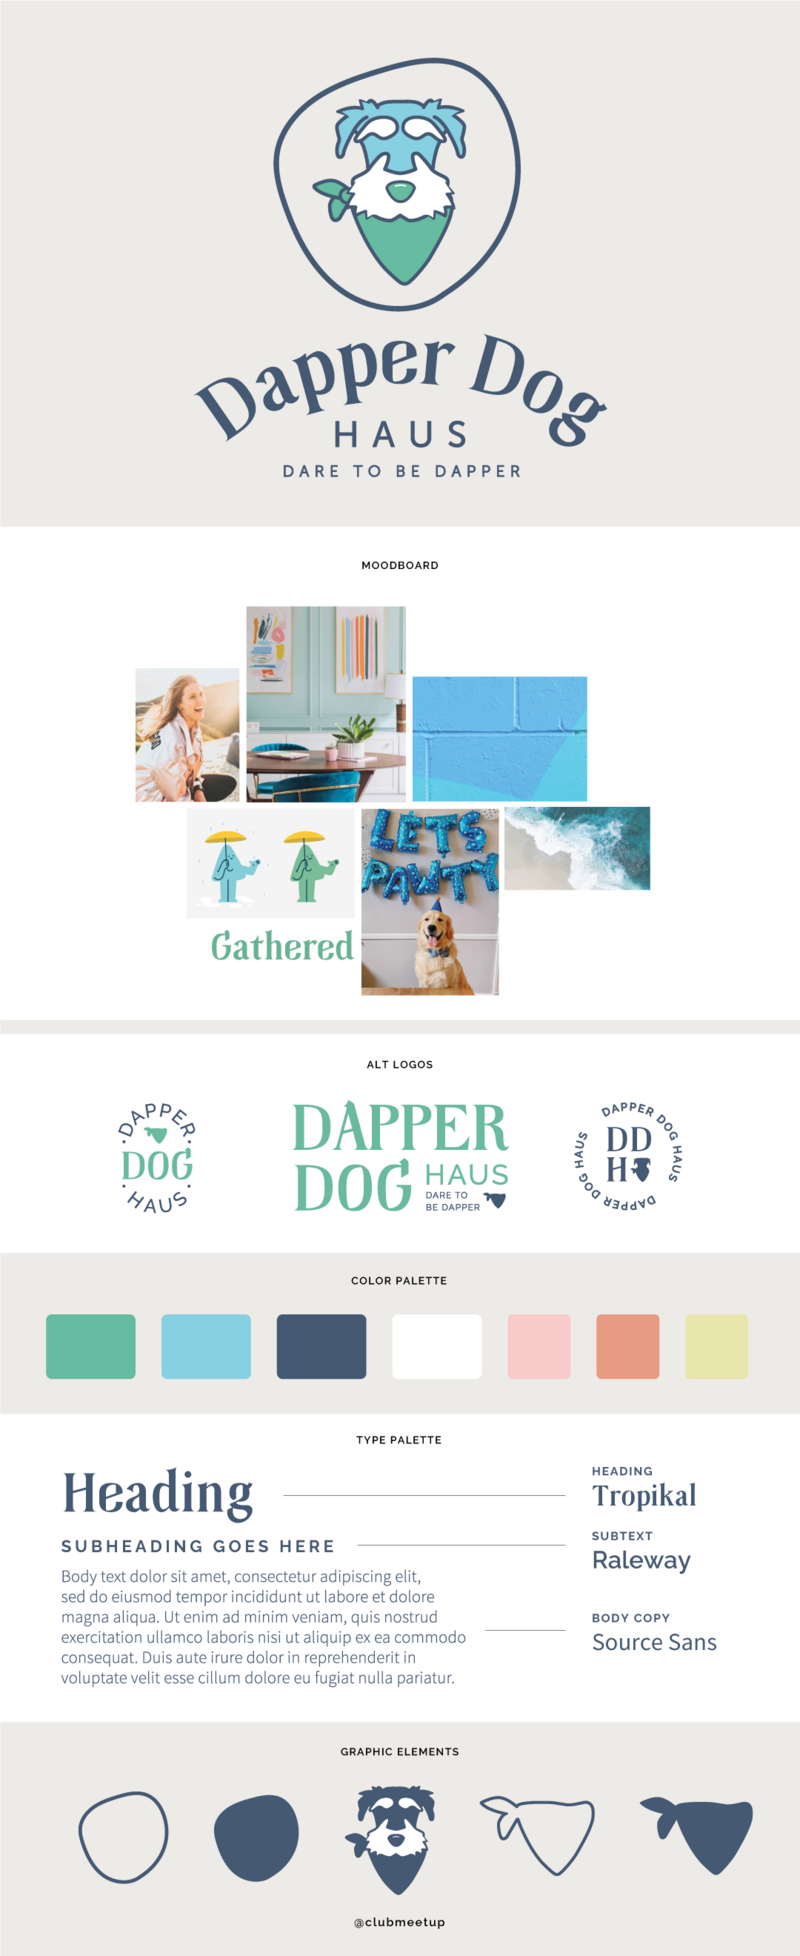 Brand guidelines with logos, colors, typography, graphic elements, mood board